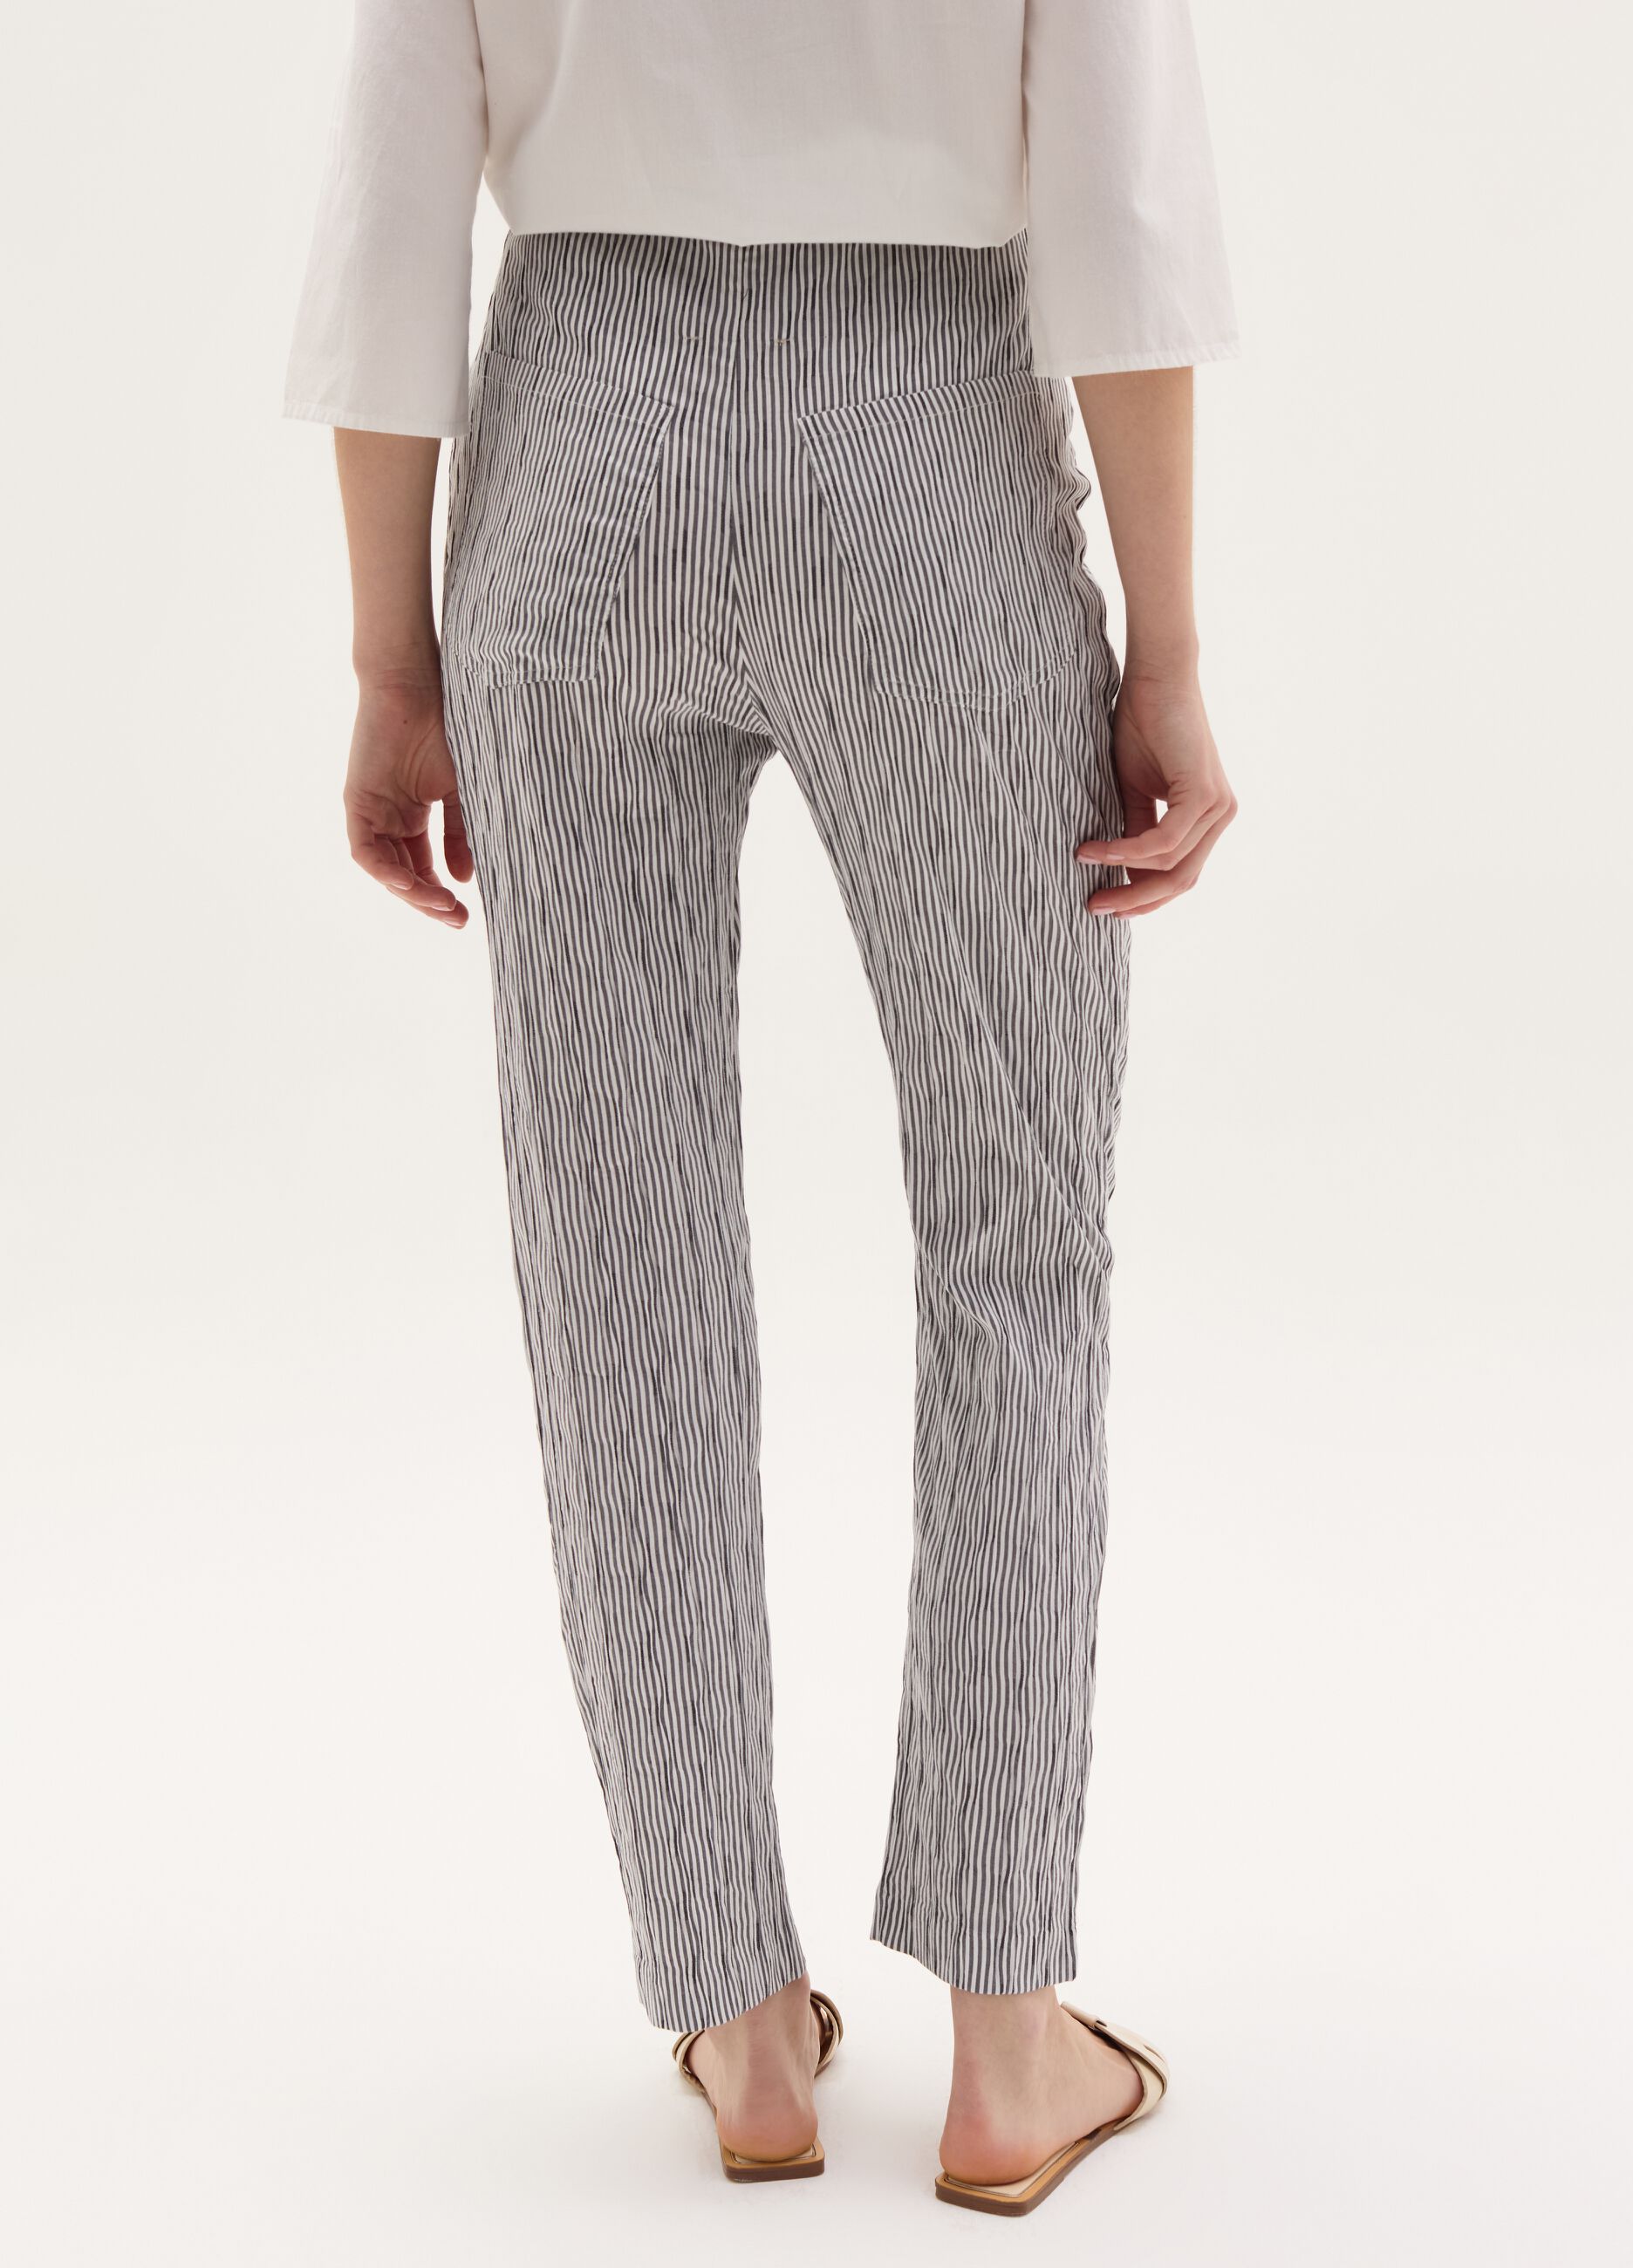 Maternity trousers with thin stripes